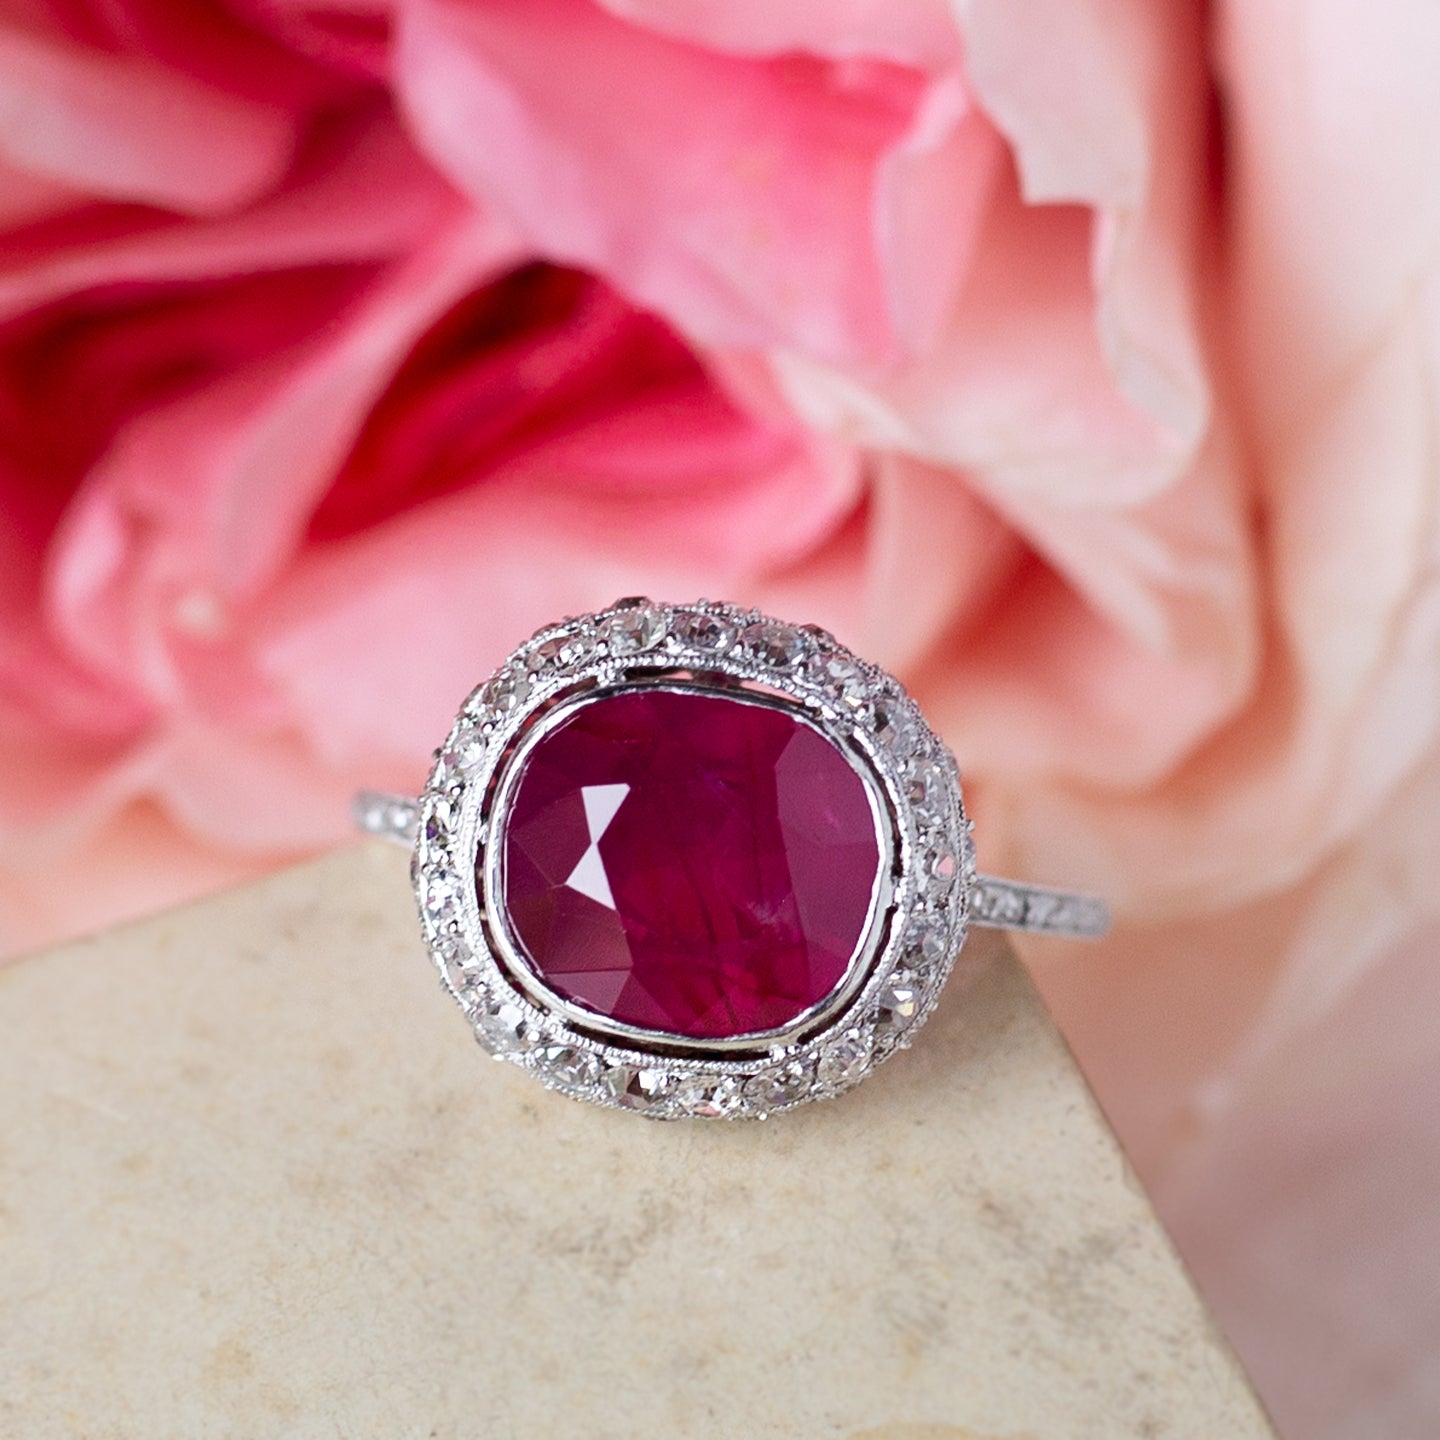 Top 5 FAQs About Rubies